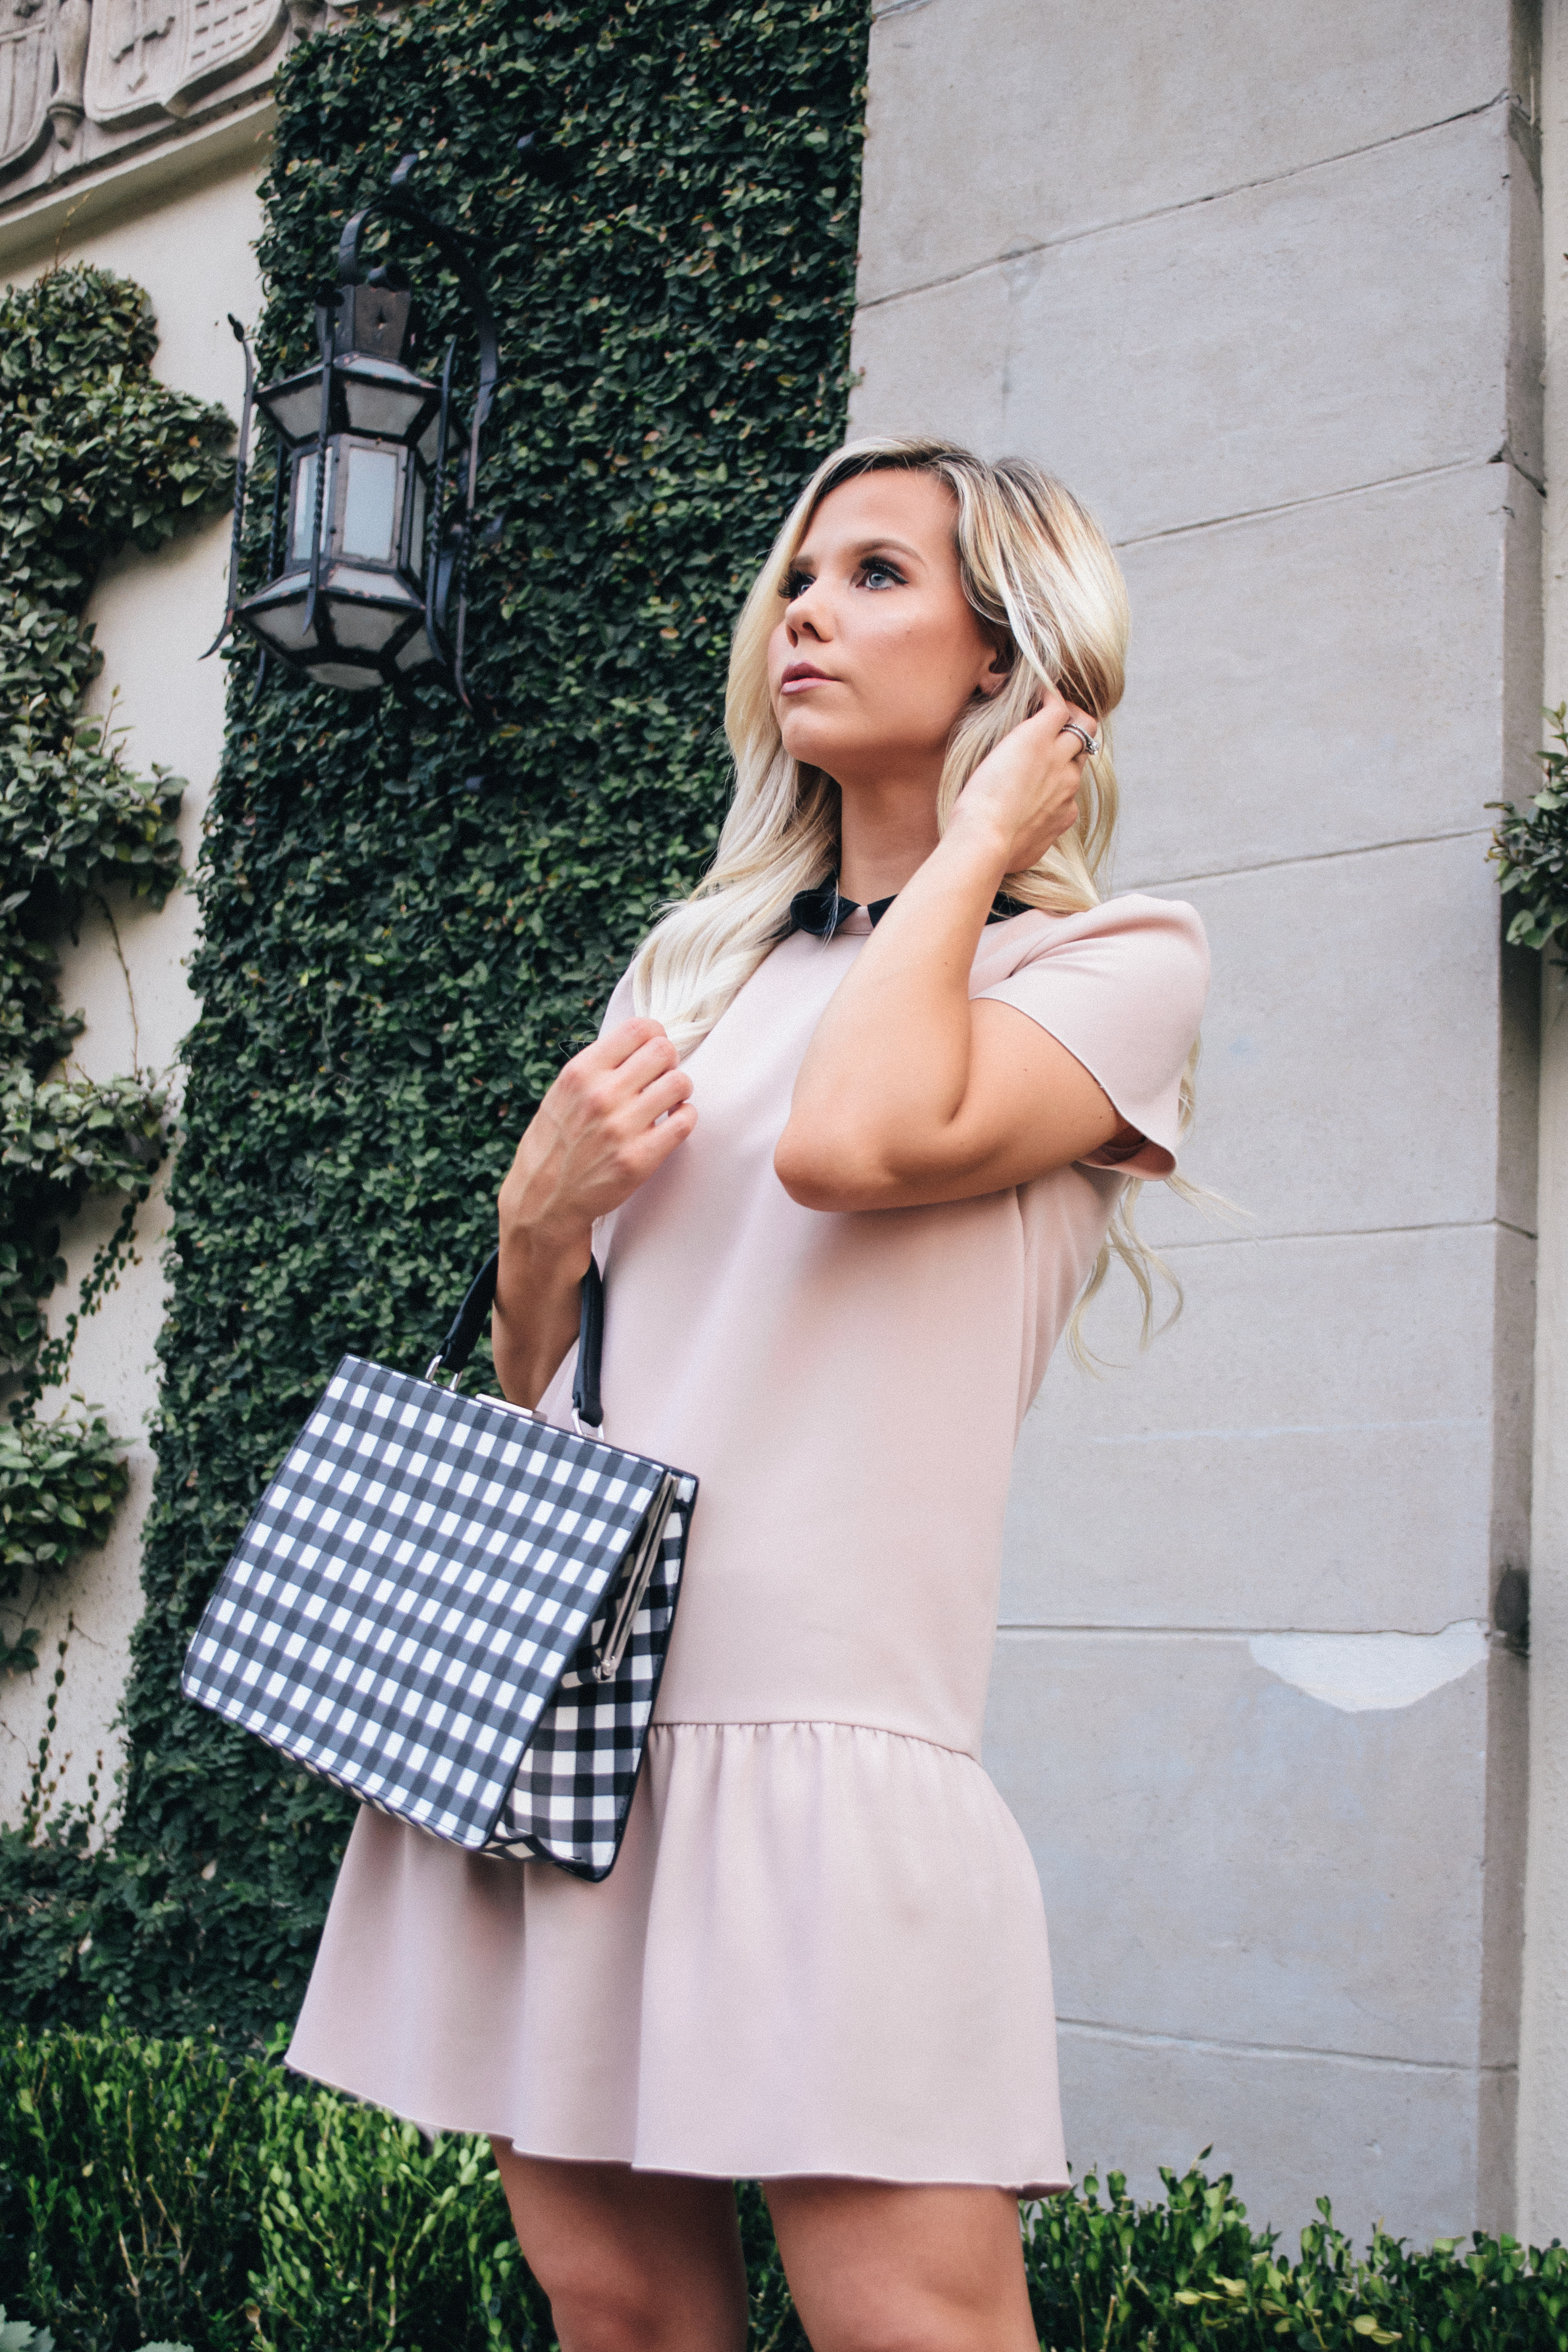 Red Valentino Pink Collar Dress and gingham bag #classyoutfit #classy #classystyle